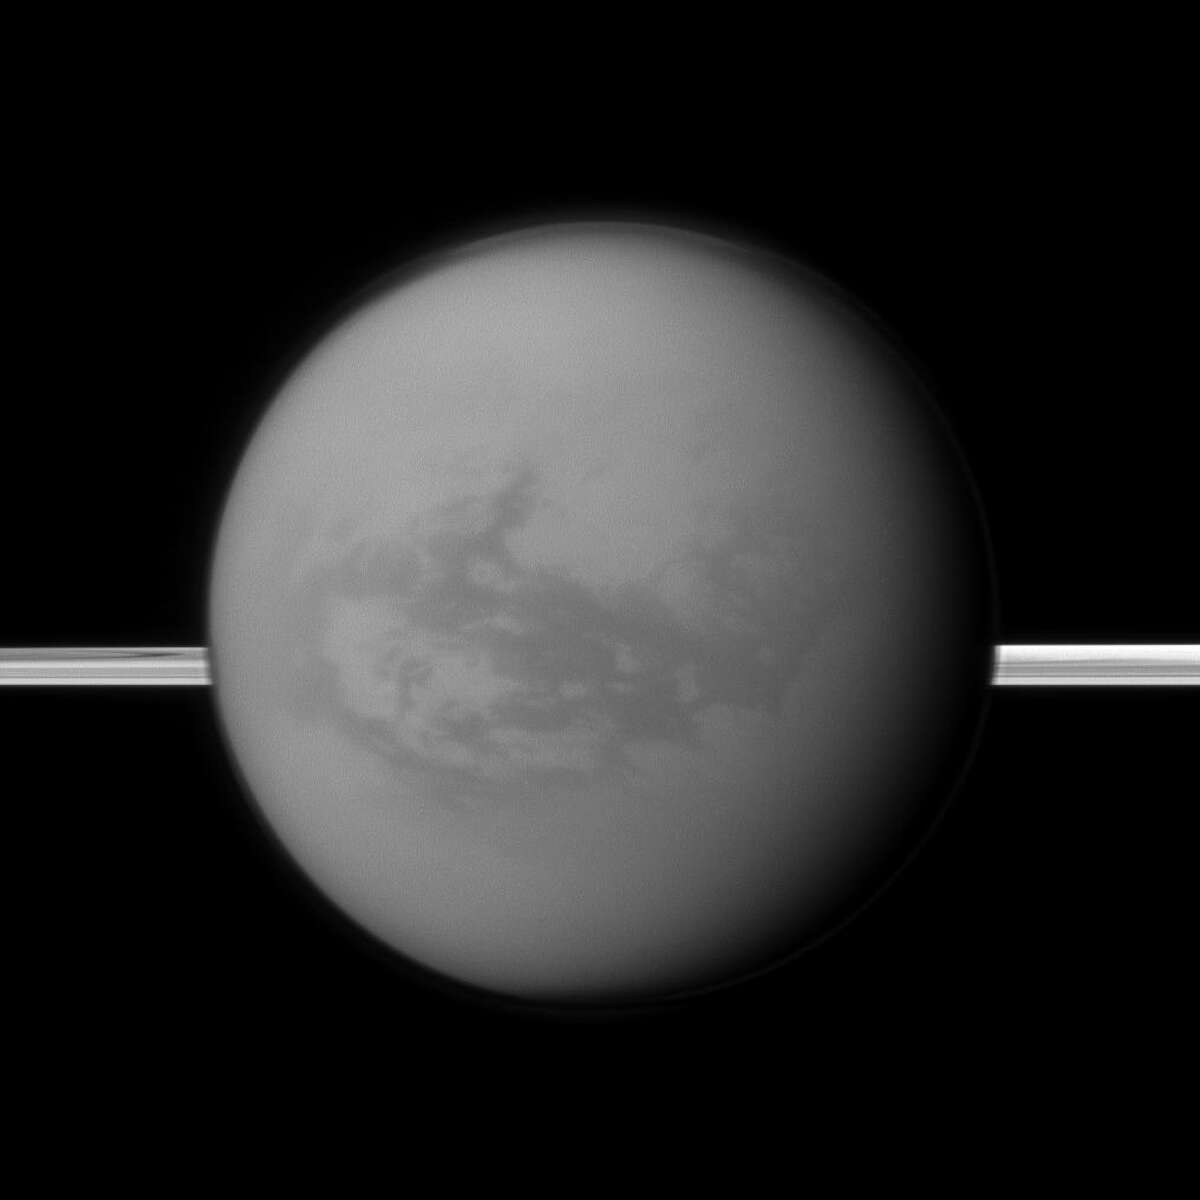 This image provided by NASA shows Titan with Saturn's rings in the background. A new study being released on Thur. June 14, 2012 suggests the dark areas near Titan's equator indicate the presence of a hydrocarbon lake and several ponds, a surprise to scientists who thought lakes only existed at the poles. (AP Photo/NASA)